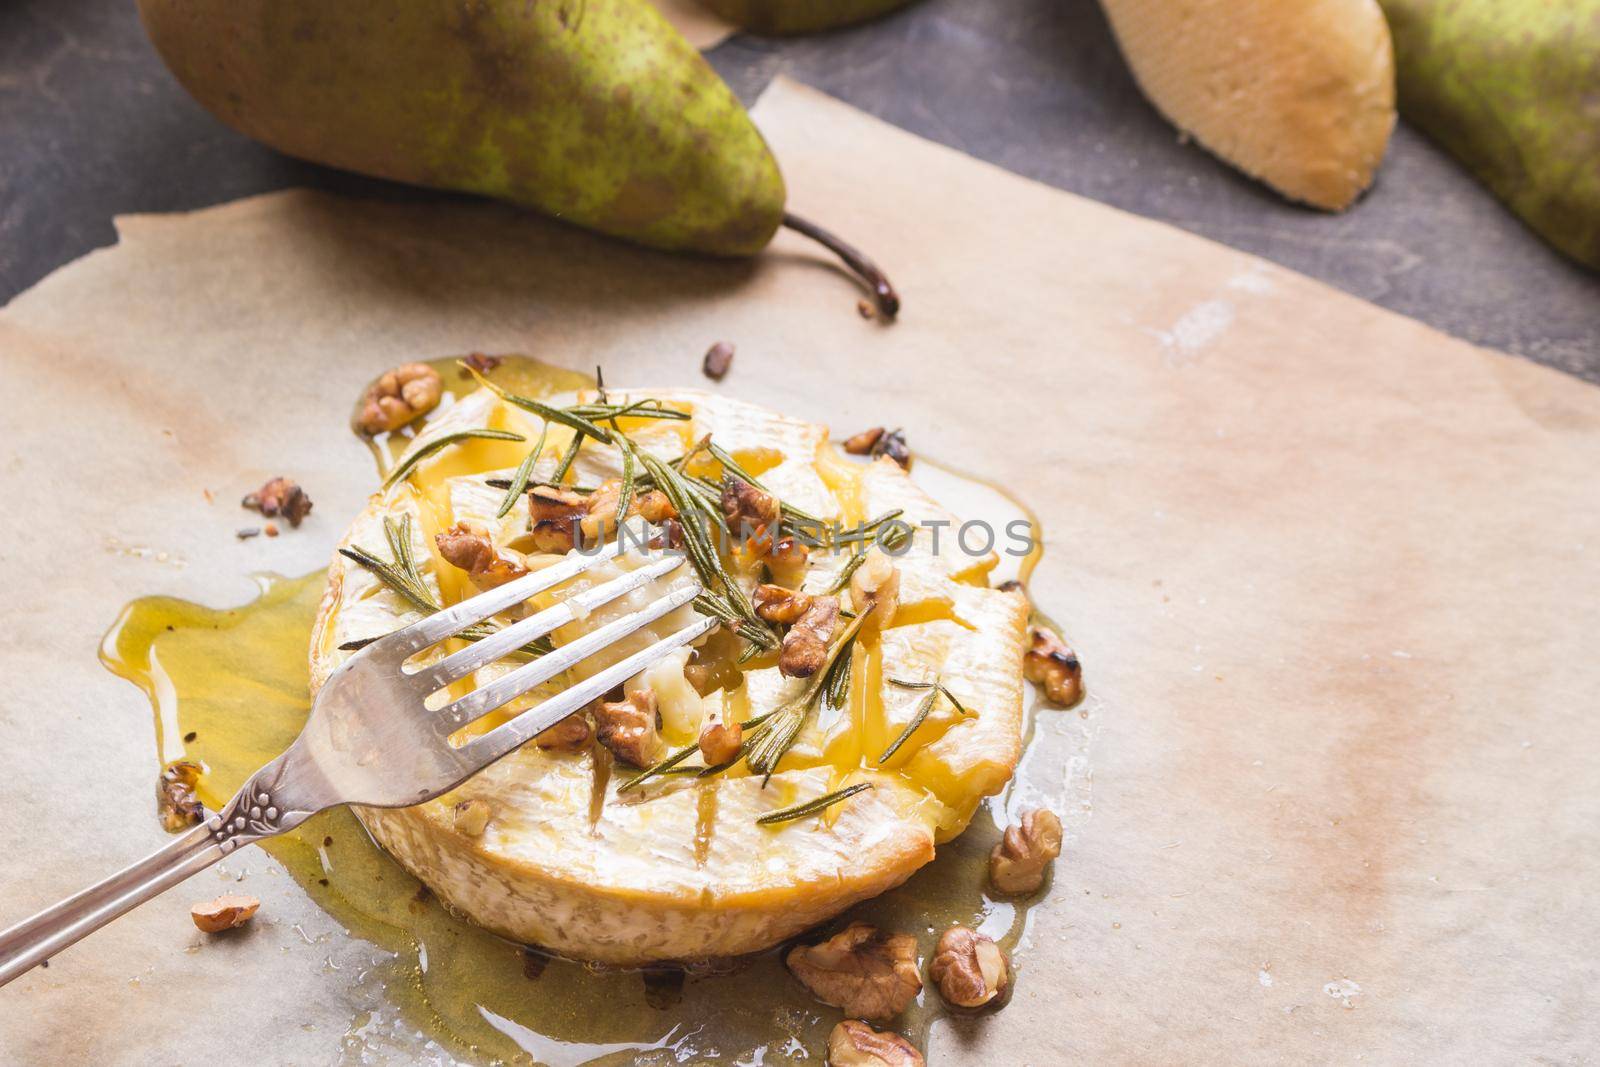 Piece of baked camambert on a fork. Delicious baked cheese with honey, walnuts, herbs and pears